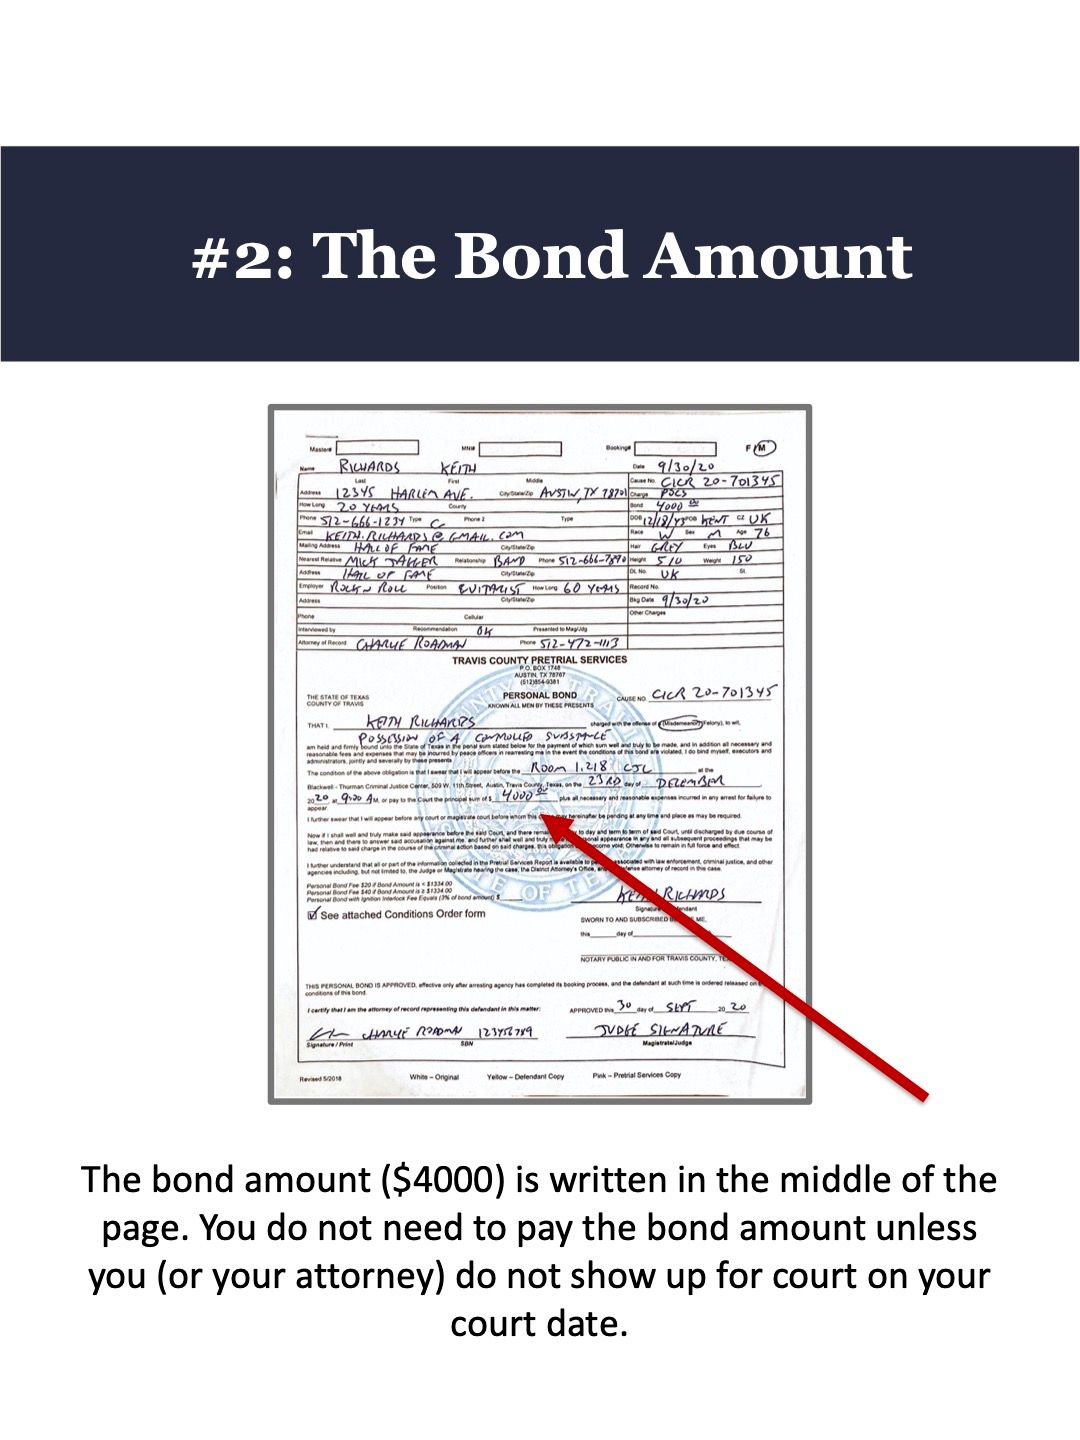 Personal Bond Guide page 3.jpg